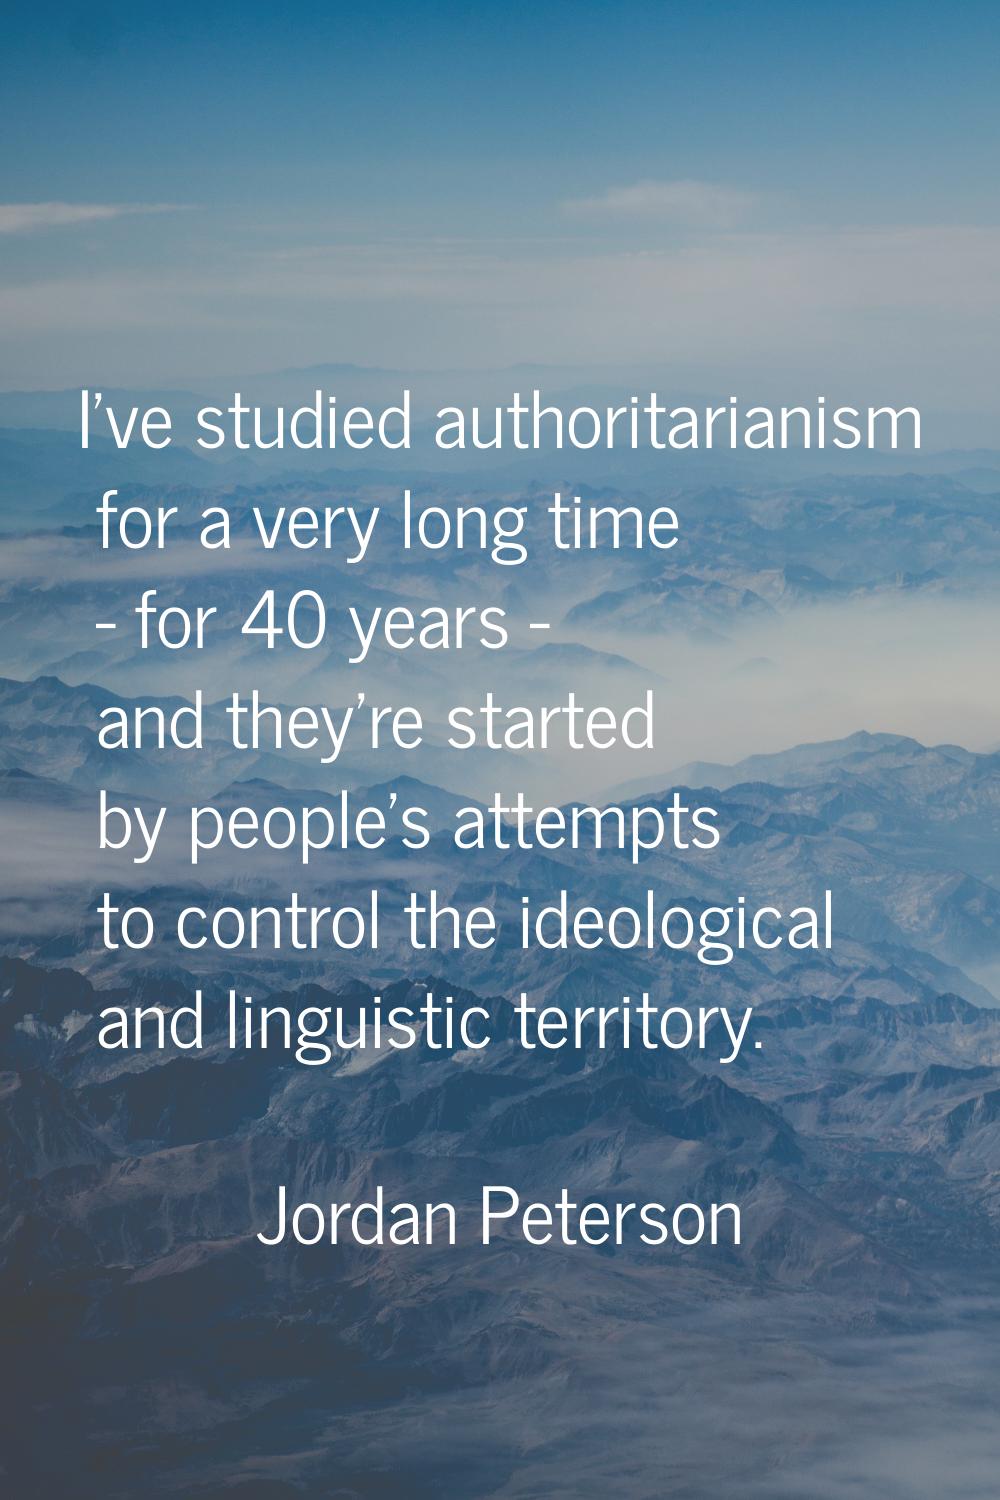 I've studied authoritarianism for a very long time - for 40 years - and they're started by people's